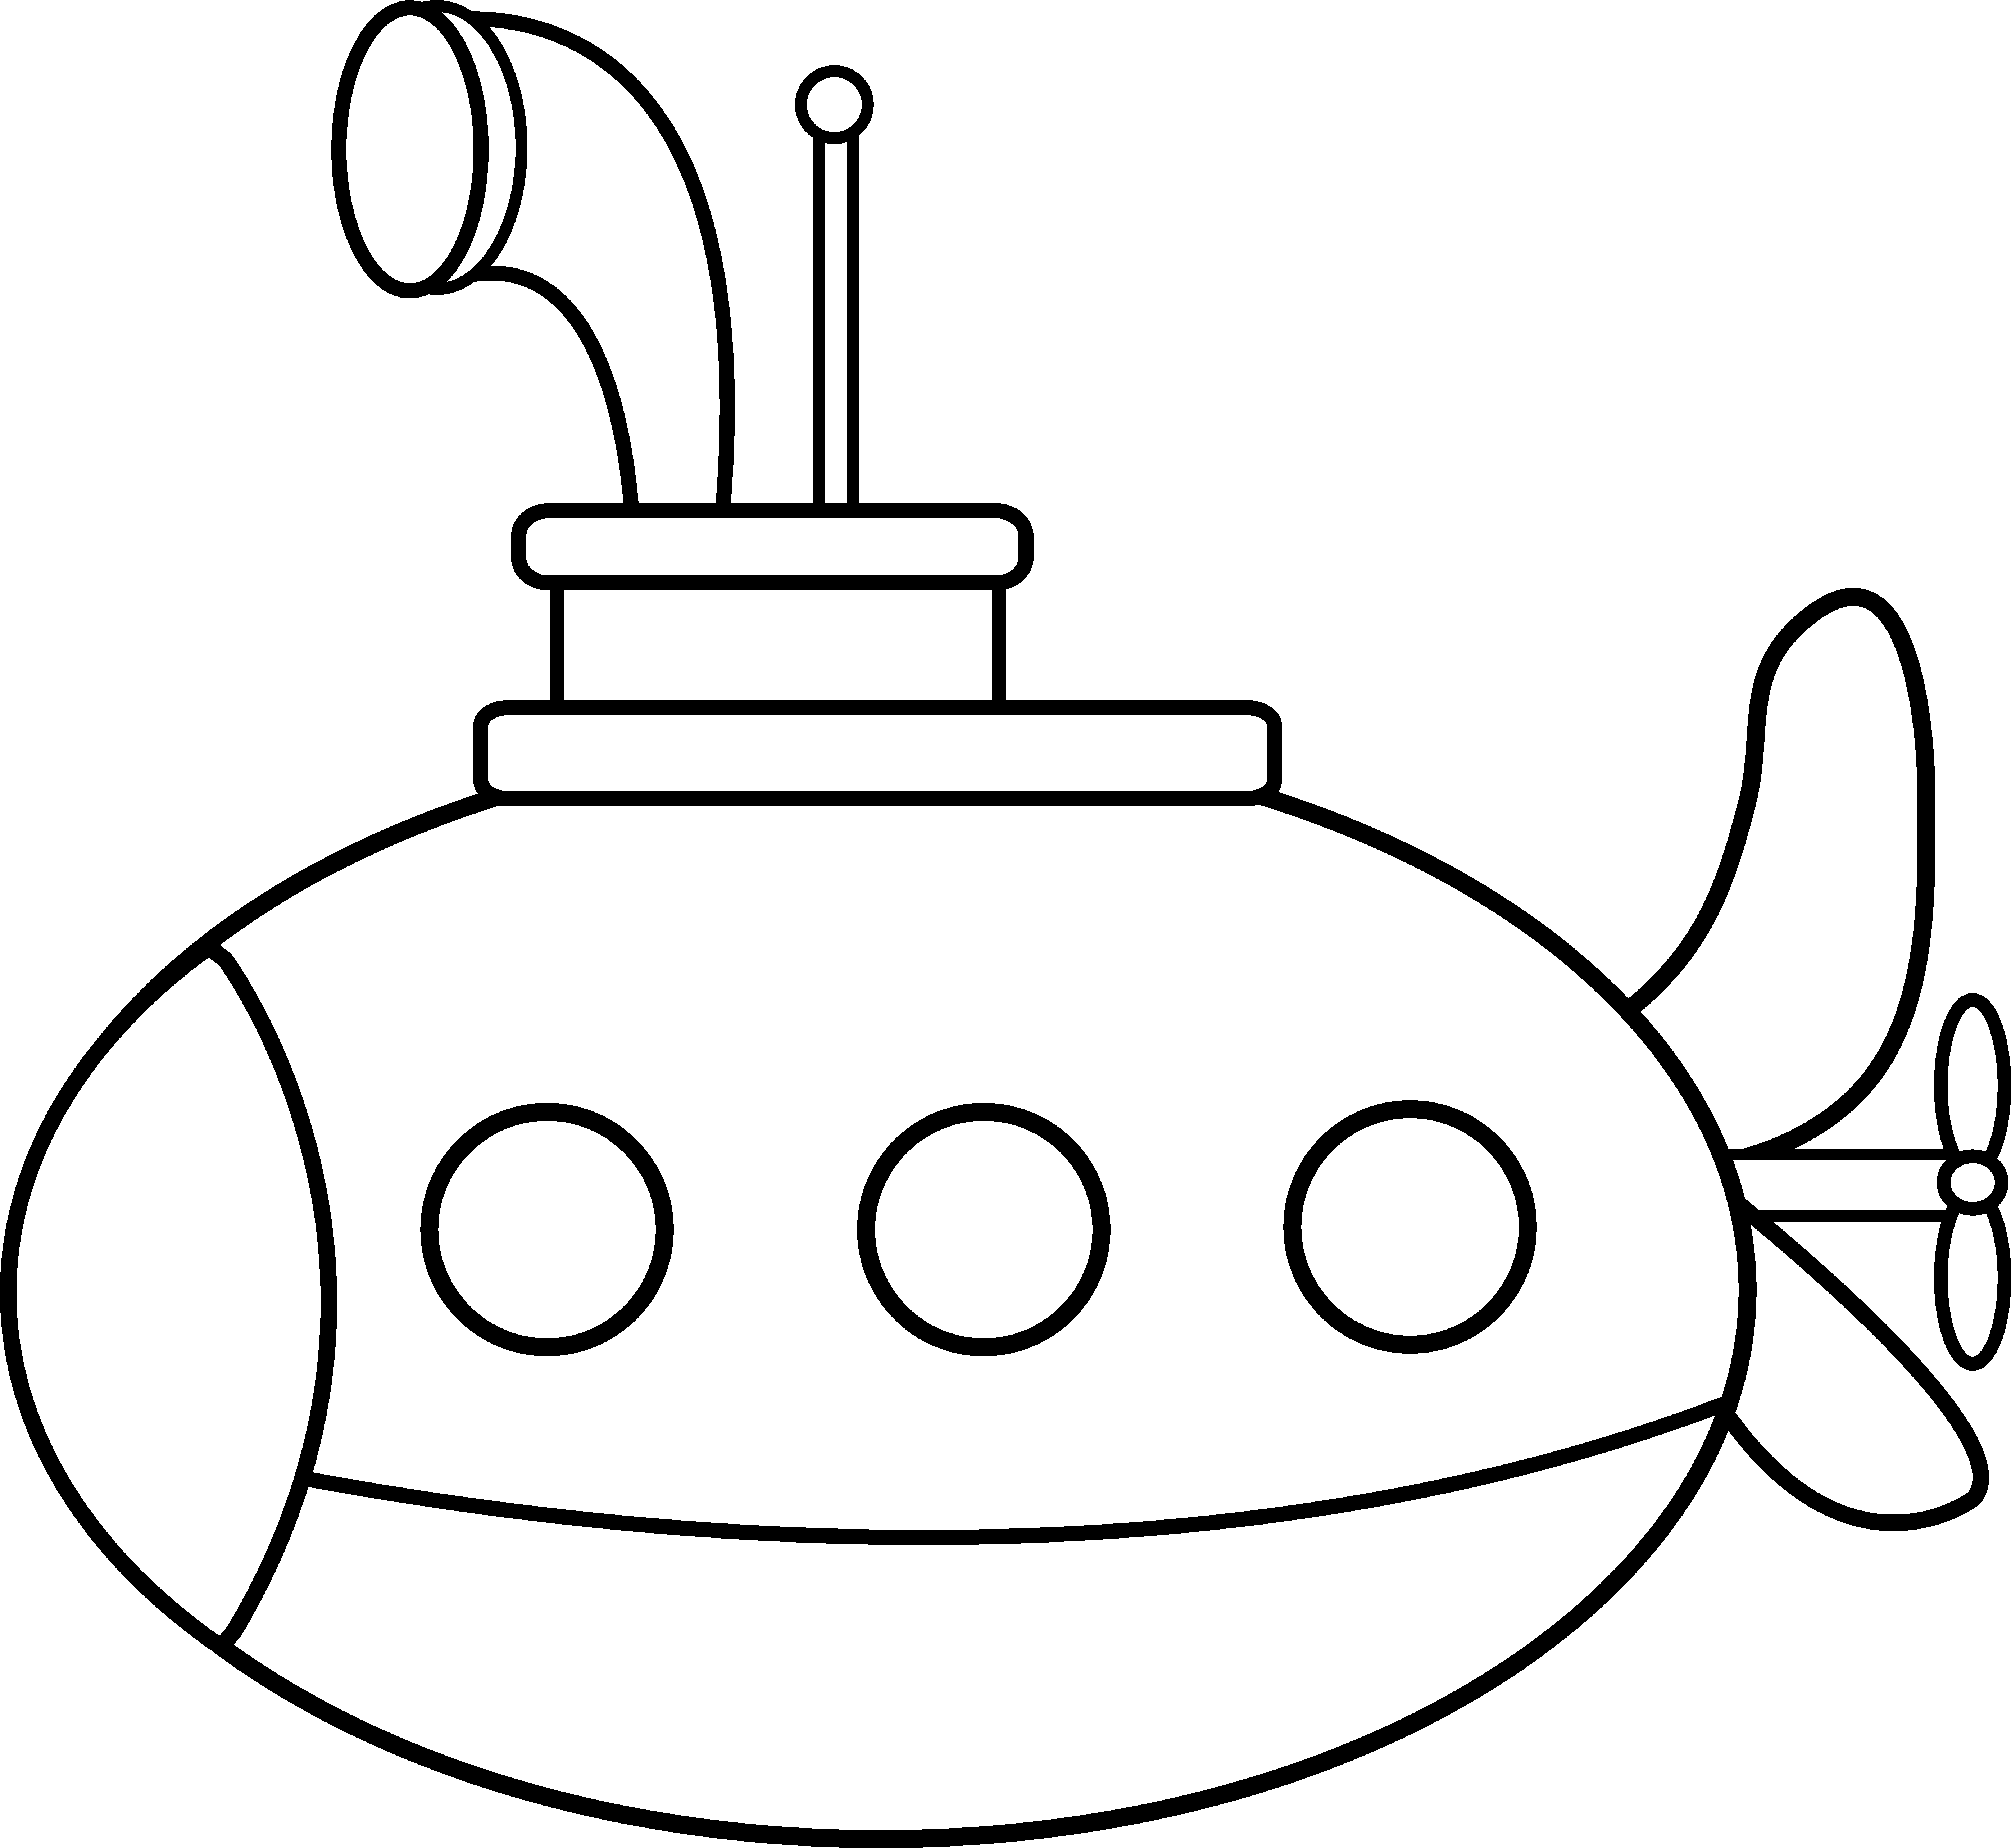 Submarine clipart printable. Best of black and